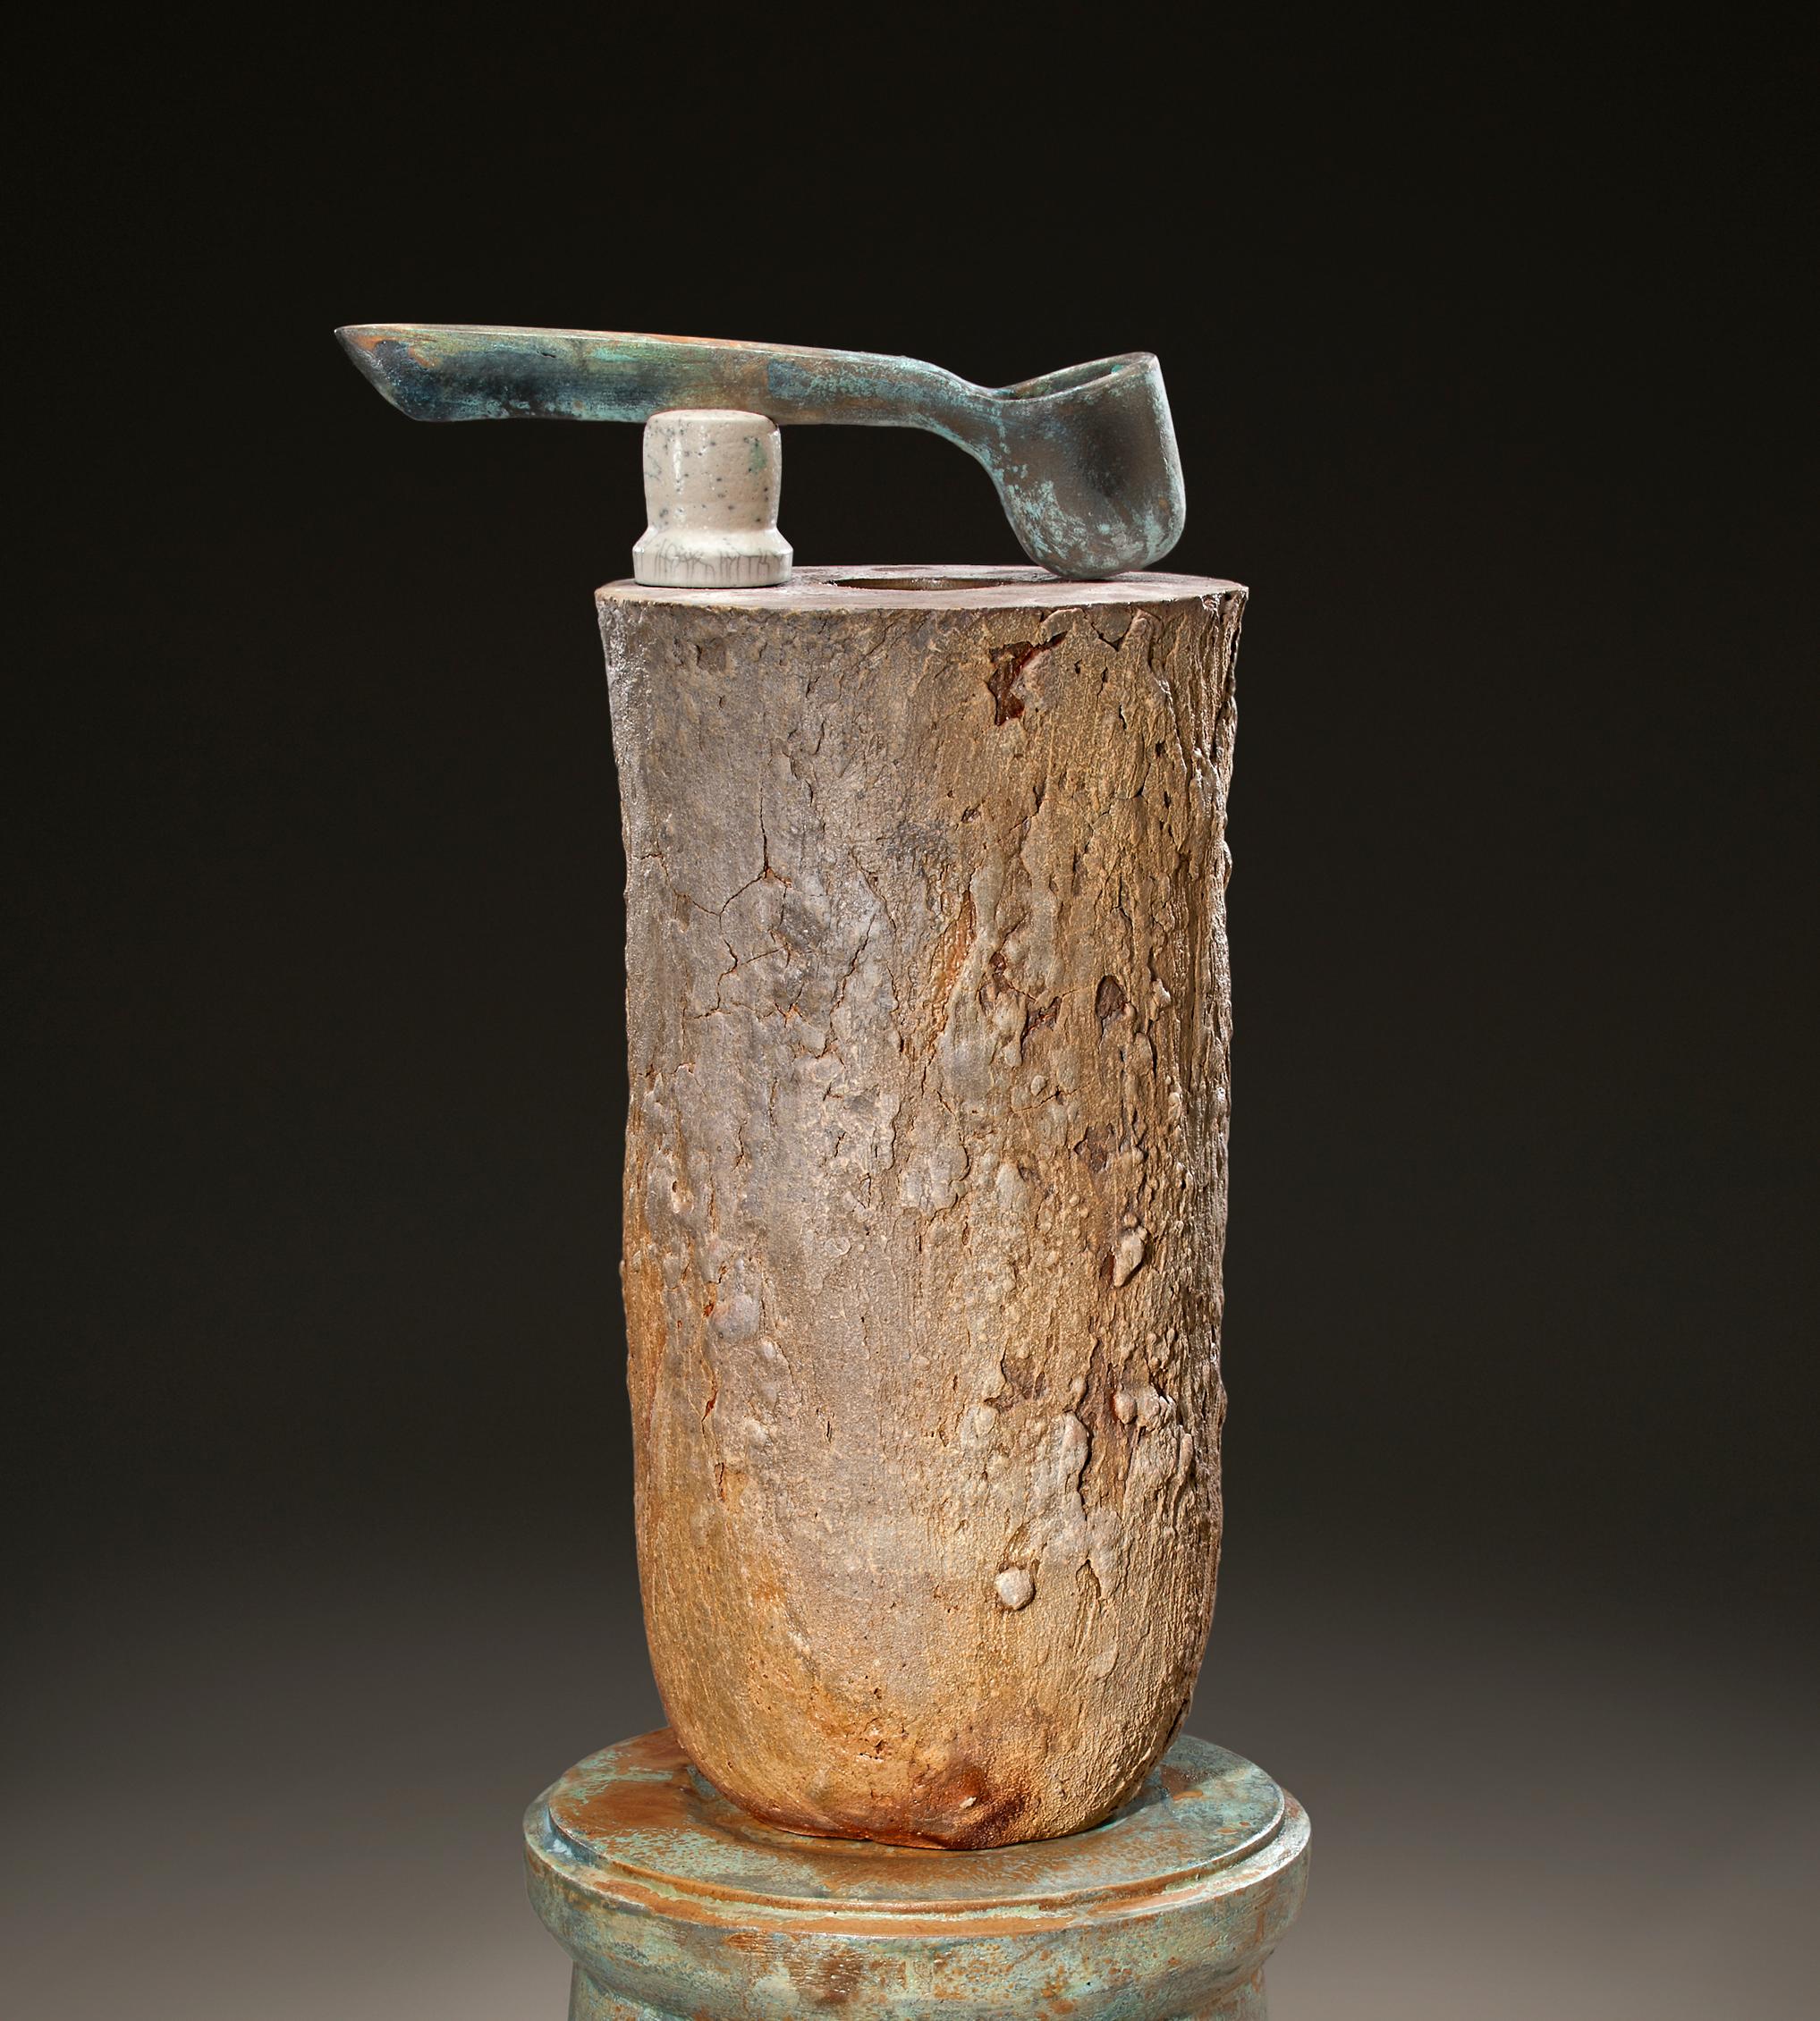 Richard Hirsch Glazed Ceramic Crucible Sculpture #14, 2010 In Excellent Condition For Sale In New York, NY